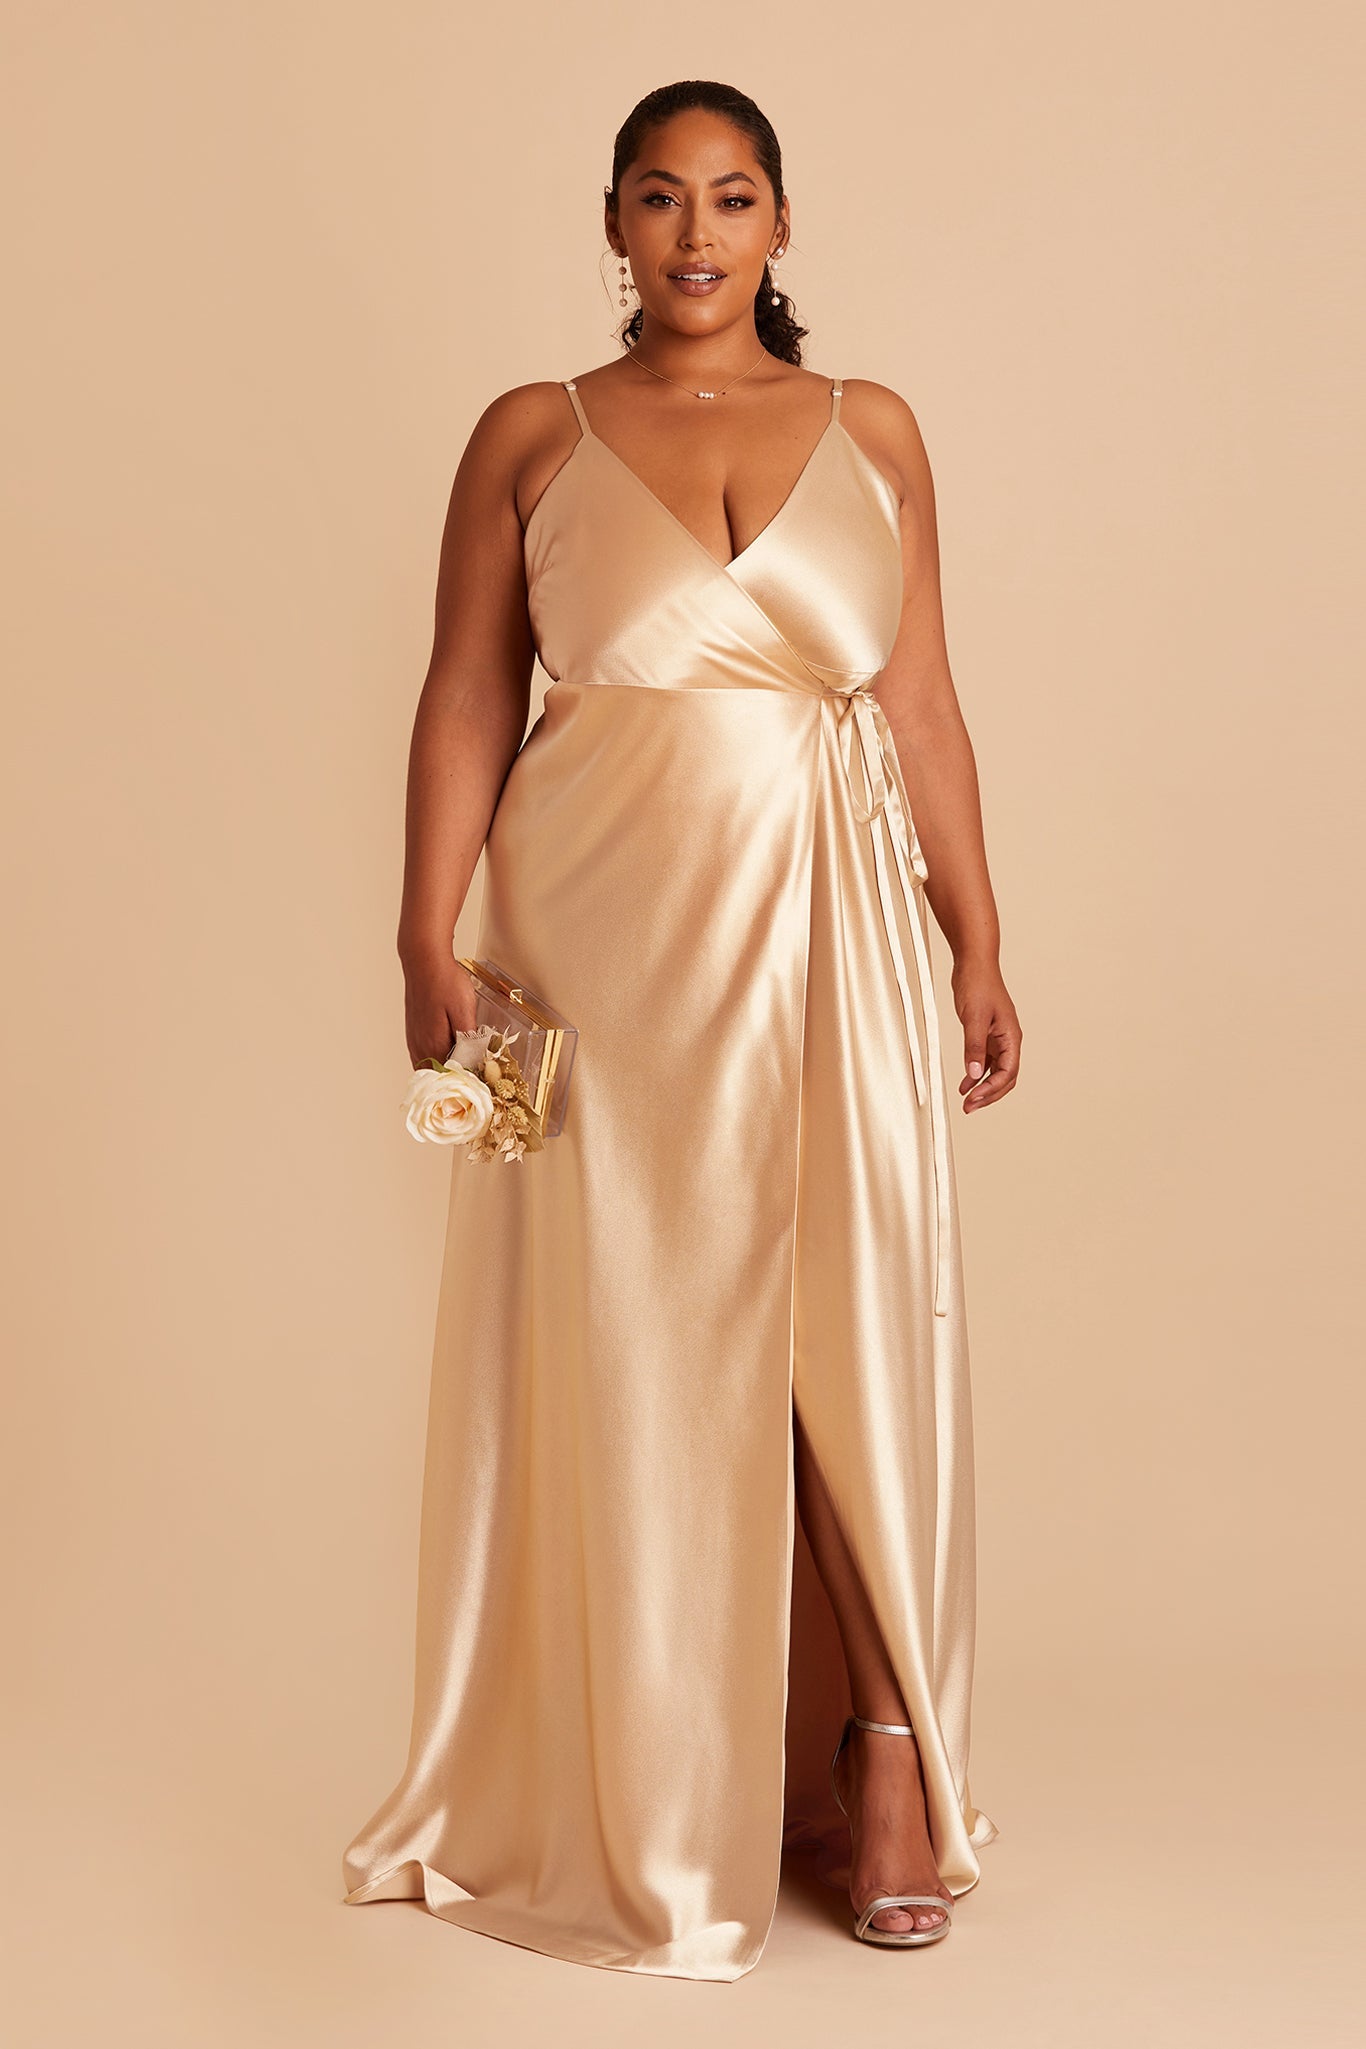 Cindy Satin Dress Curve dress in gold satin by Birdy Grey, front view